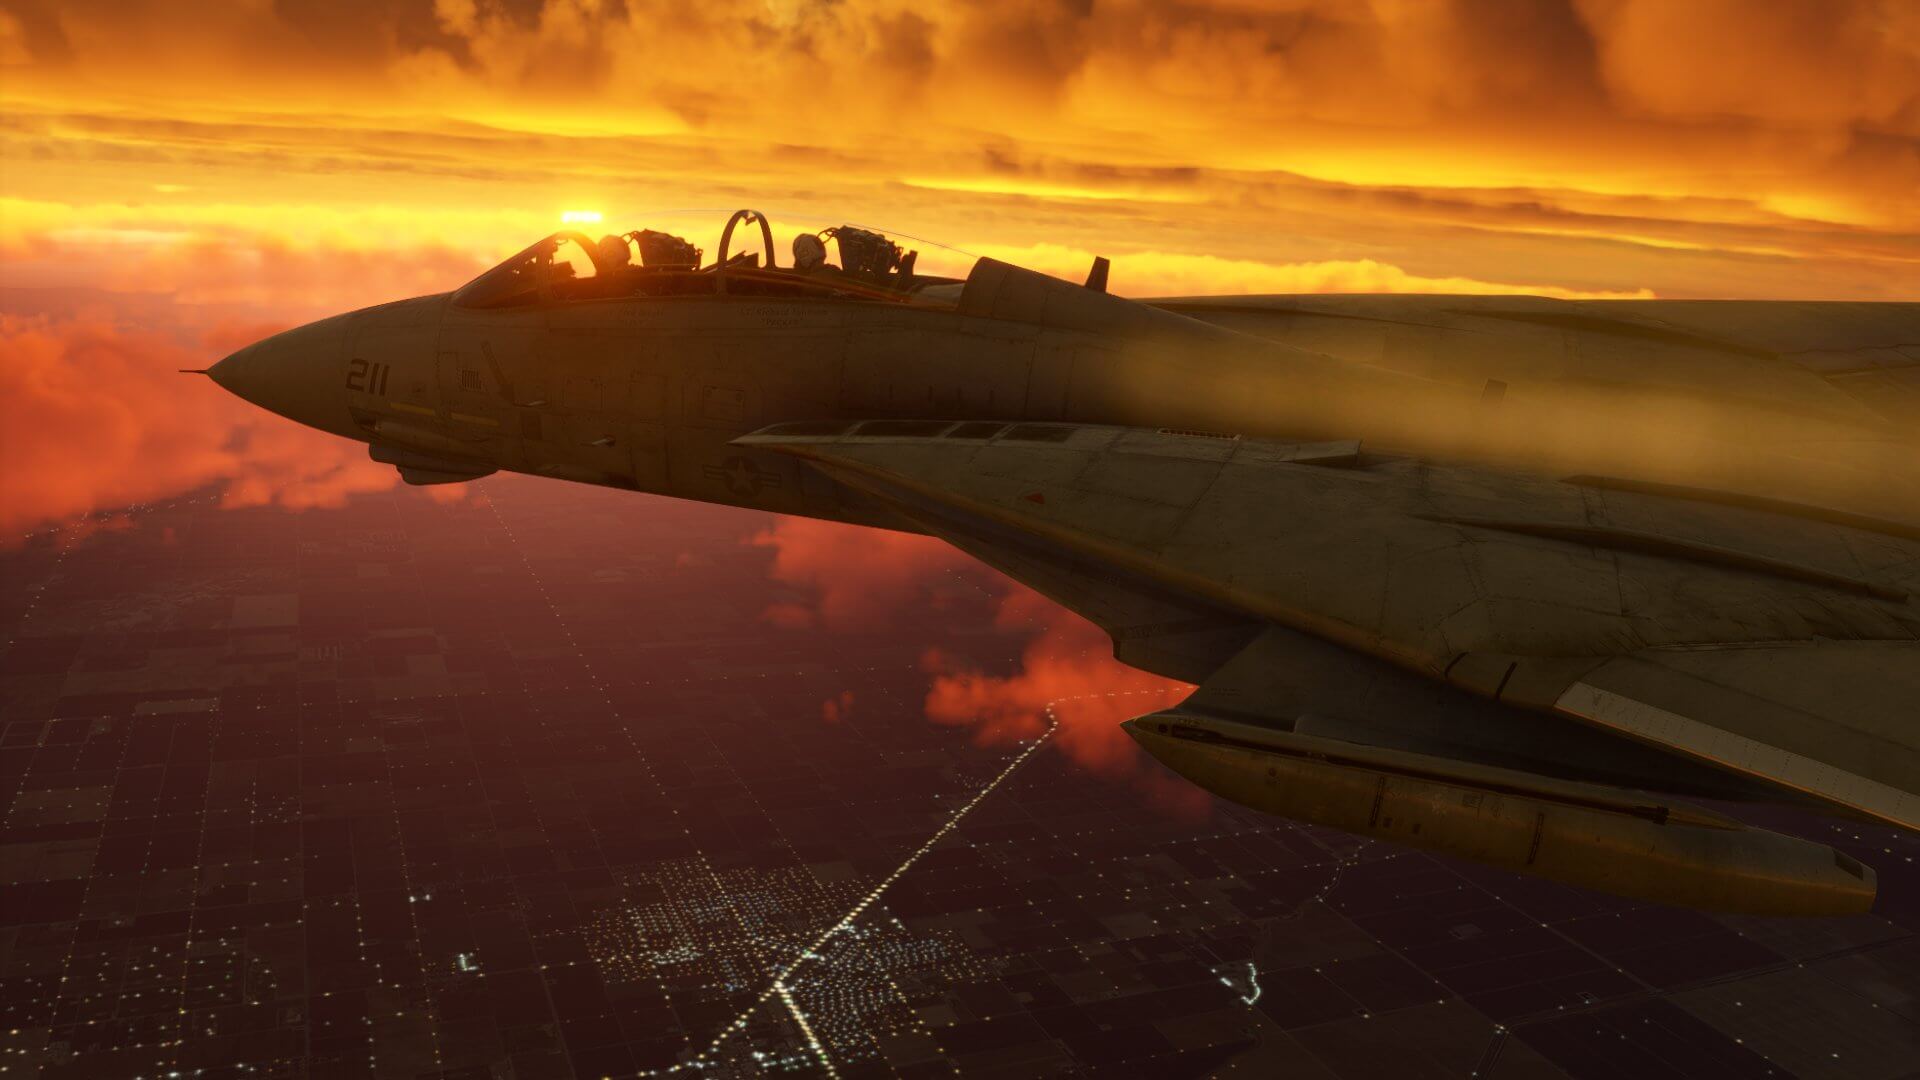 An F-14 Tomcat flies below low overcast clouds at golden hour, with the sun visible off of the right hand side of the jet, and city lights illuminated below.